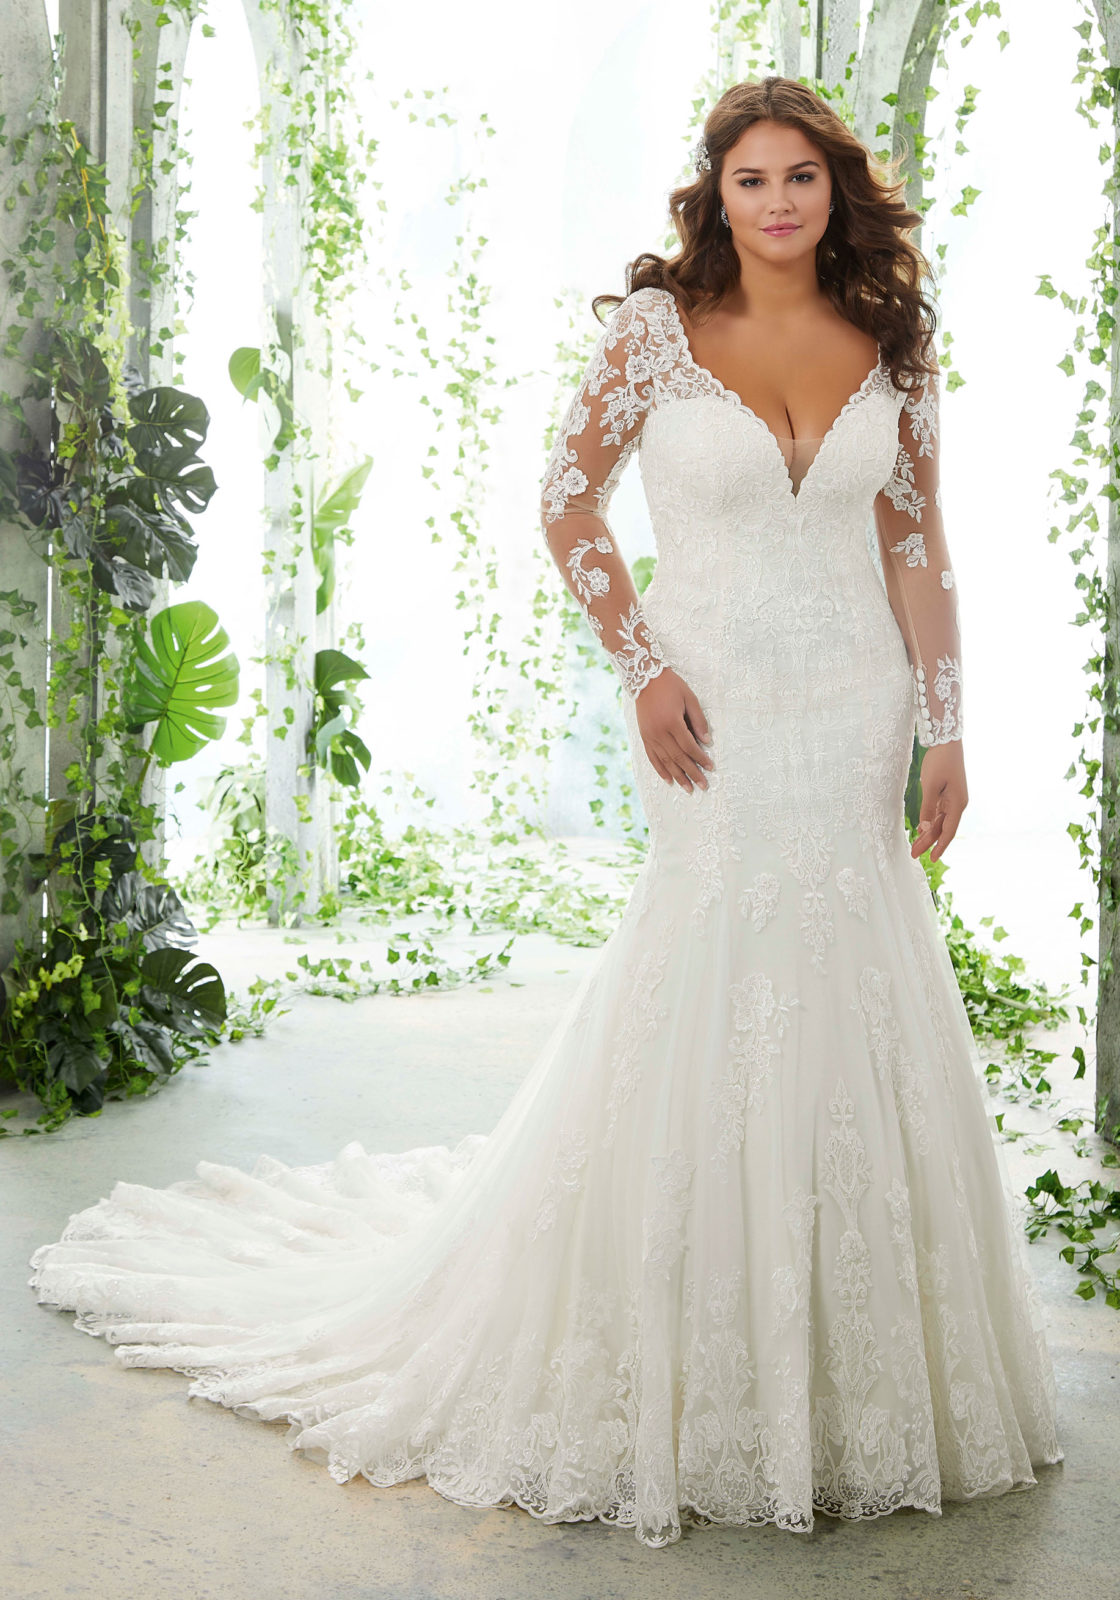 wedding gown designs for plus size